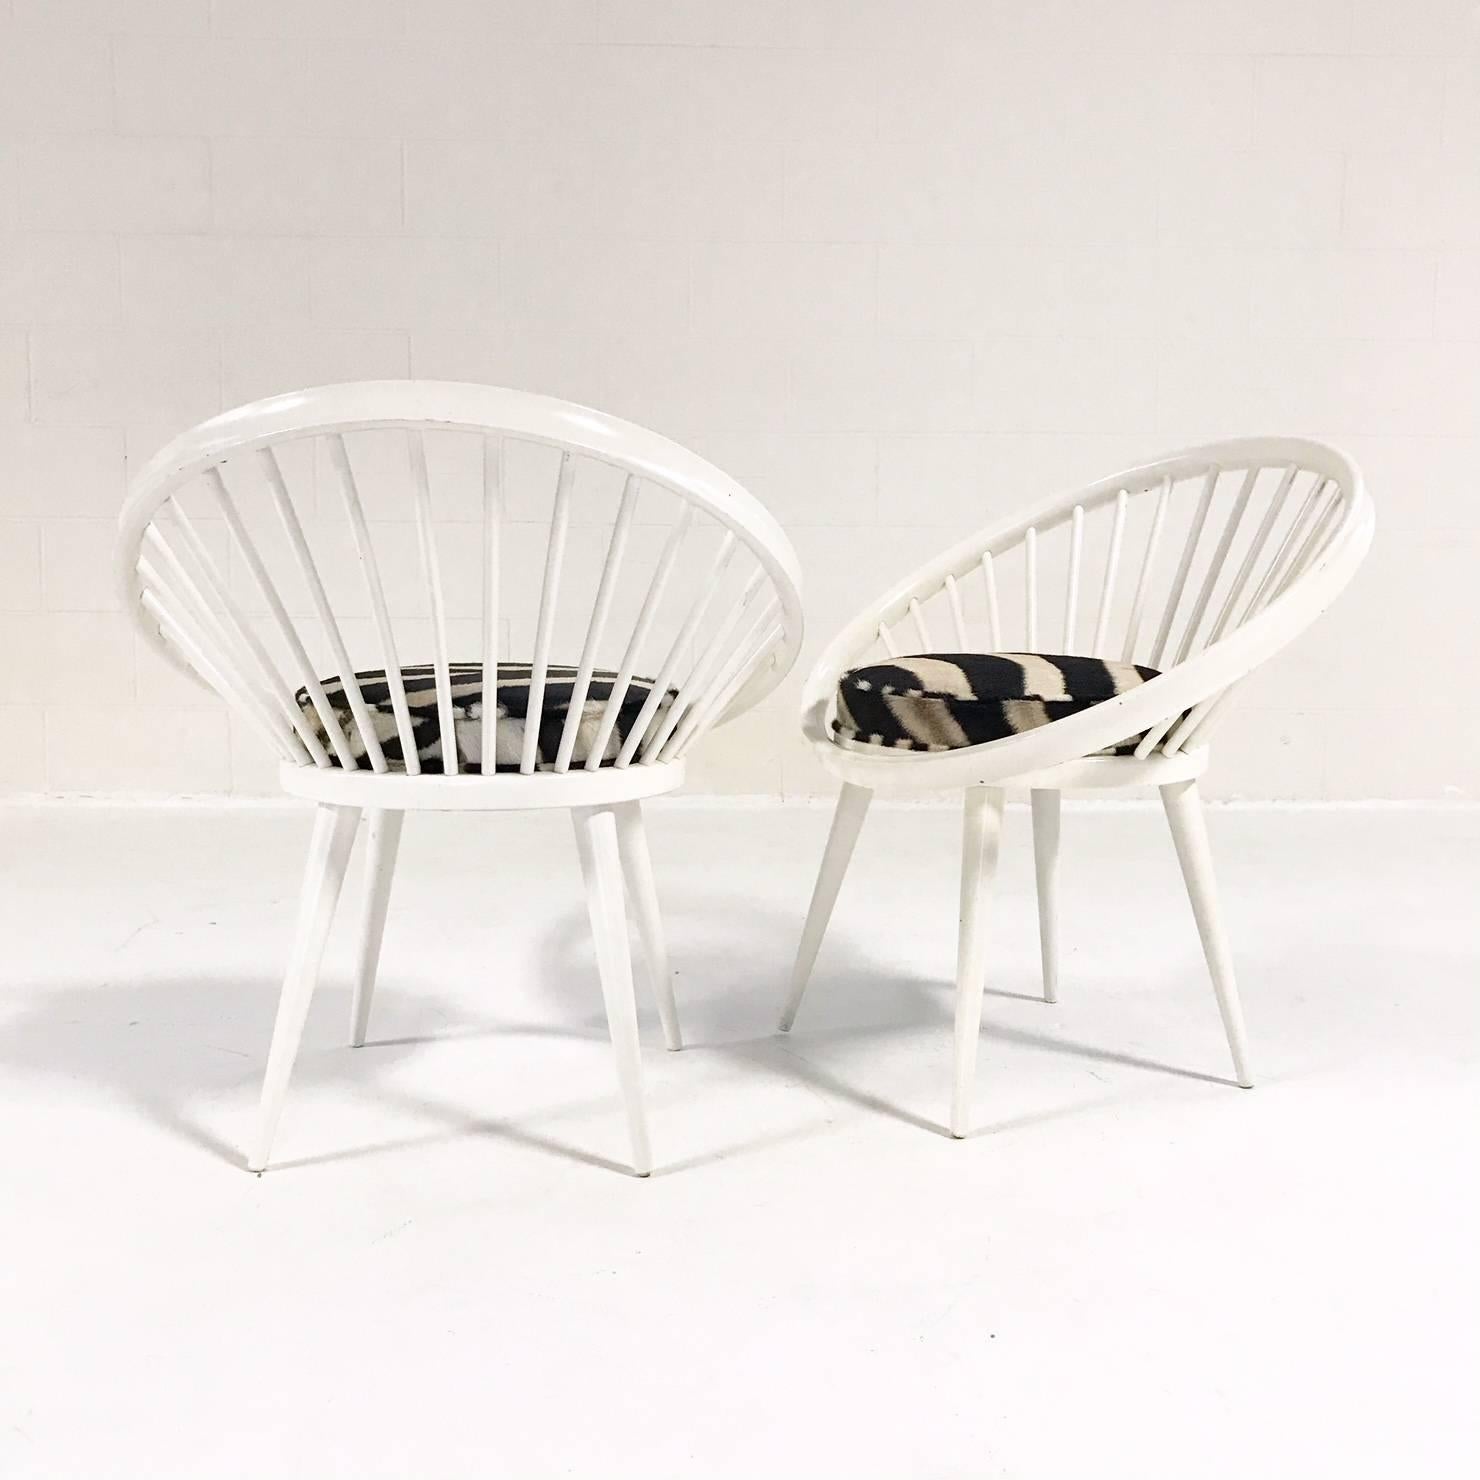 With colleagues like Aalto, Mathsson, Jacobsen and Kjaerholm, Yngve Ekström was part of the post-war modern movement that made the concept “Scandina­vian Modern” world-famous. This is a very nice pair of white lacquered circle chairs designed by